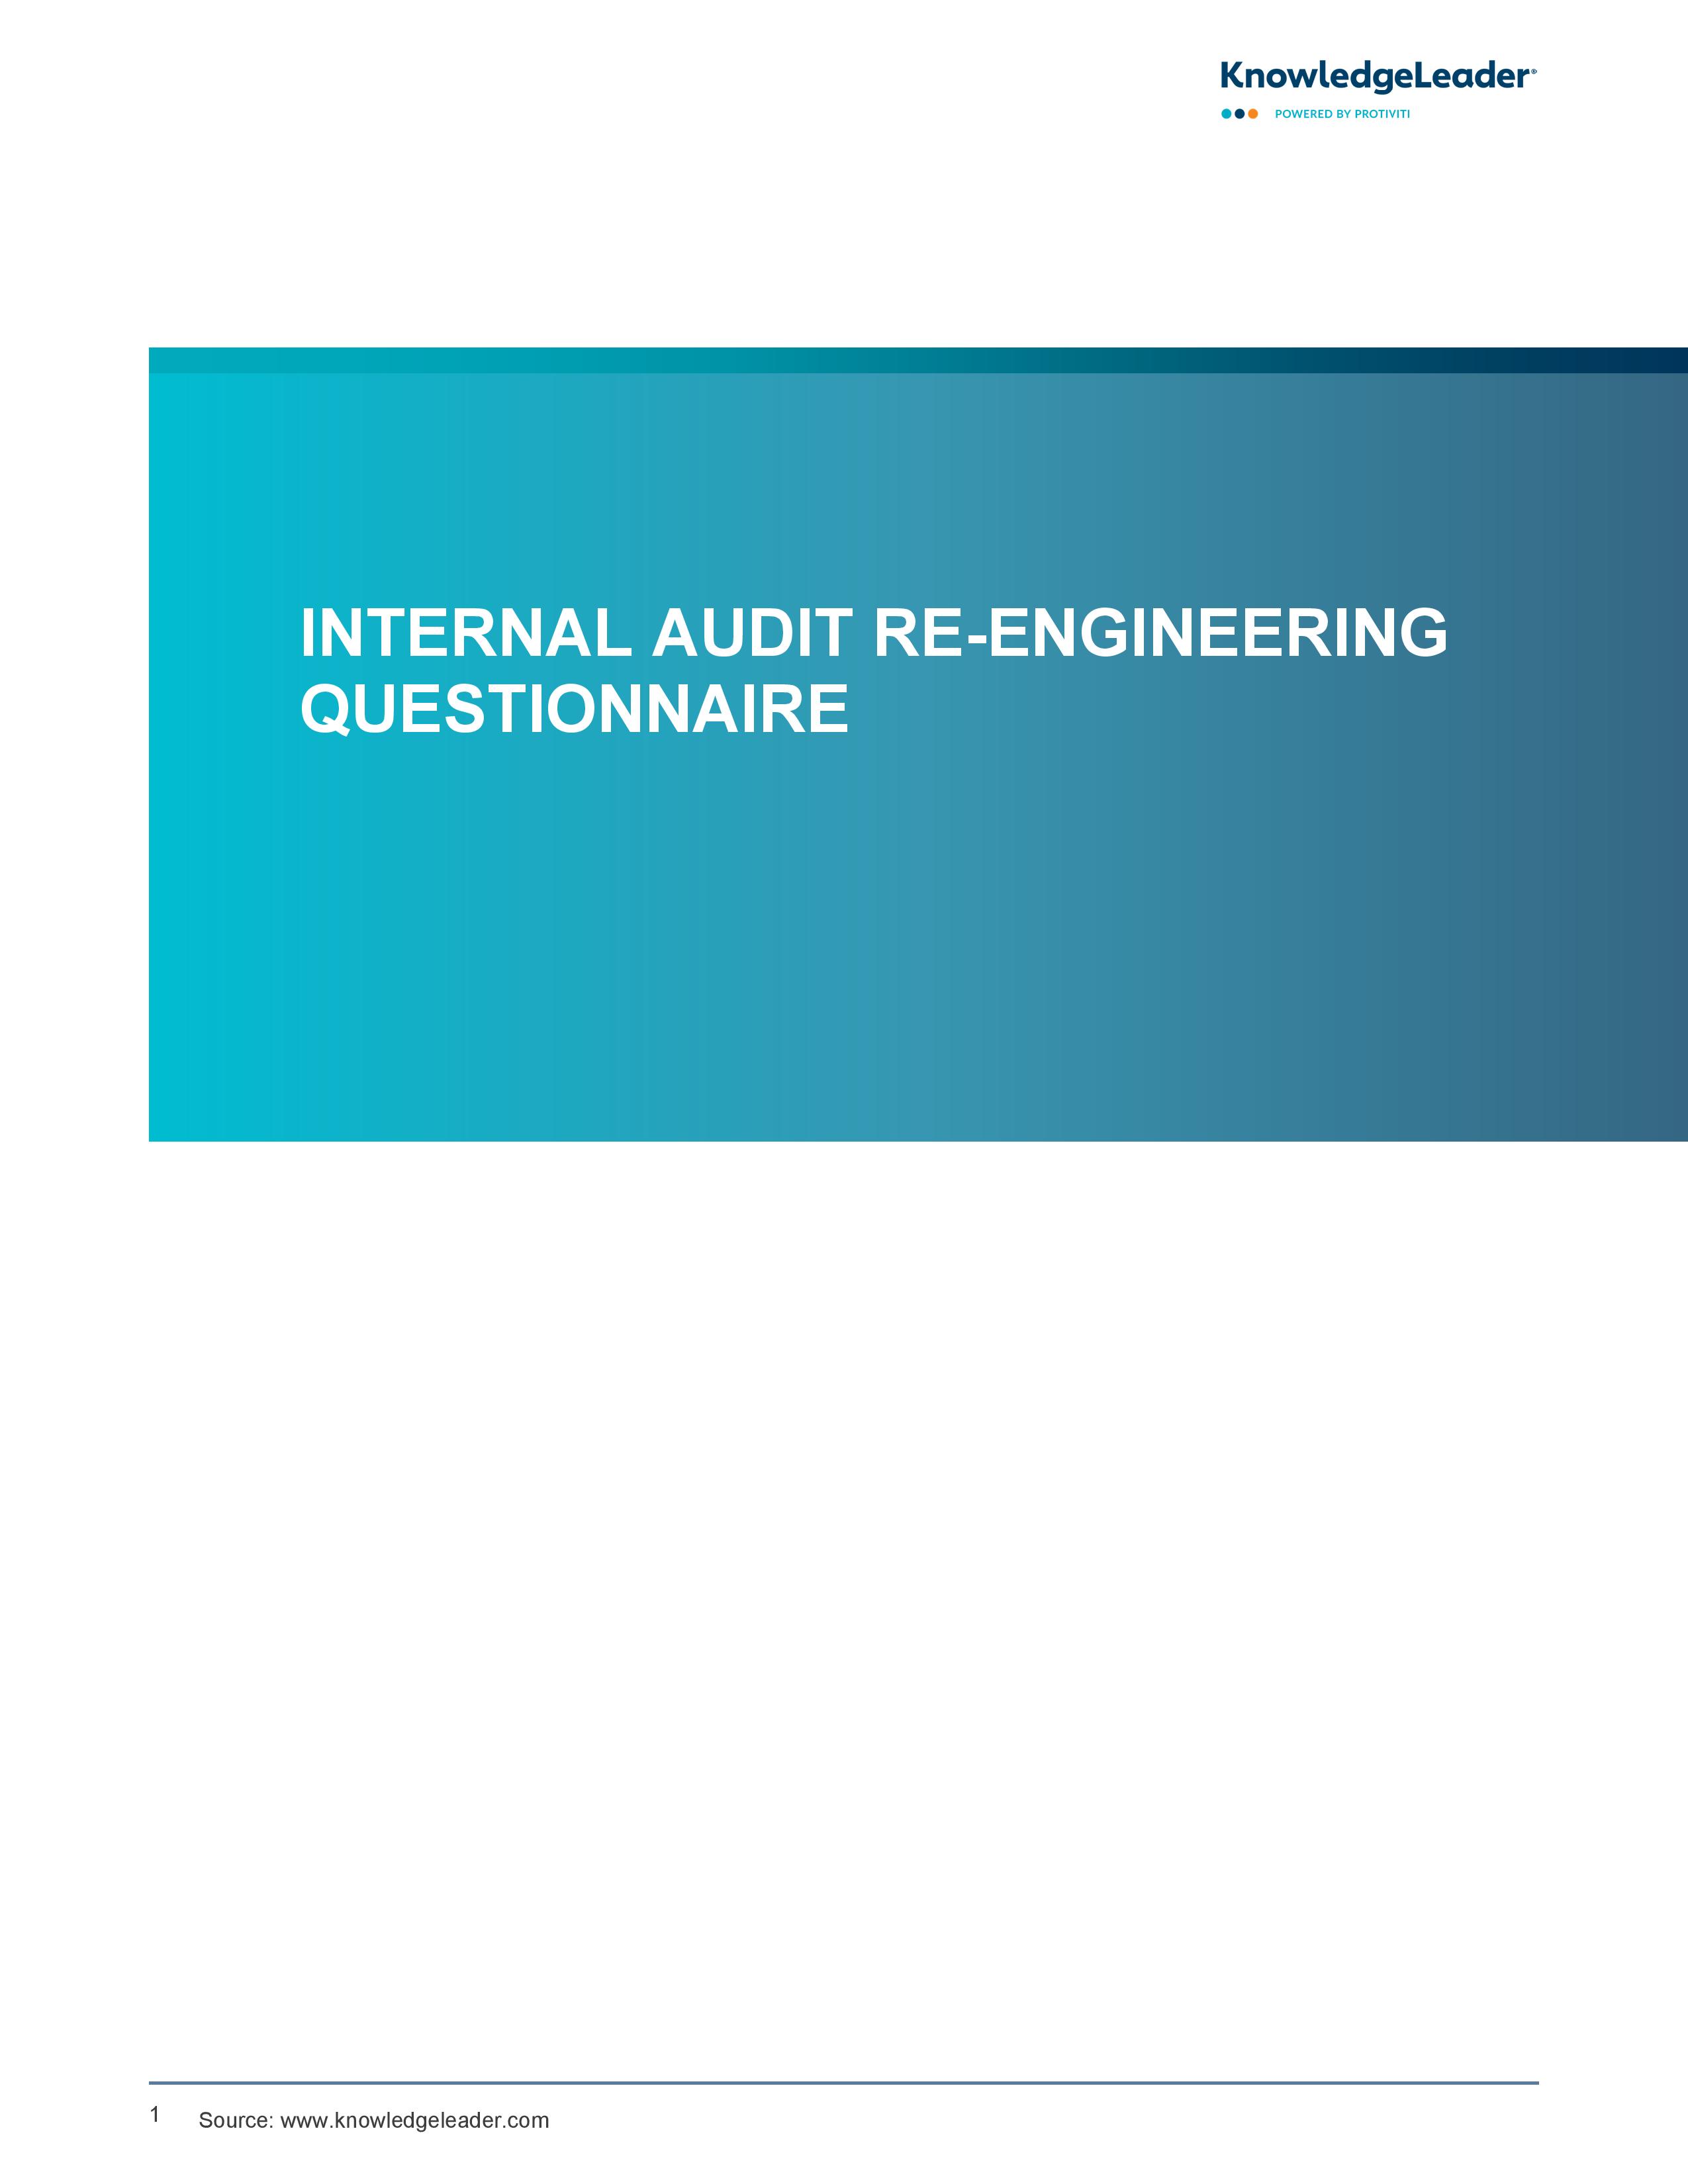 screenshot of the first page of Internal Audit Re-Engineering Questionnaire